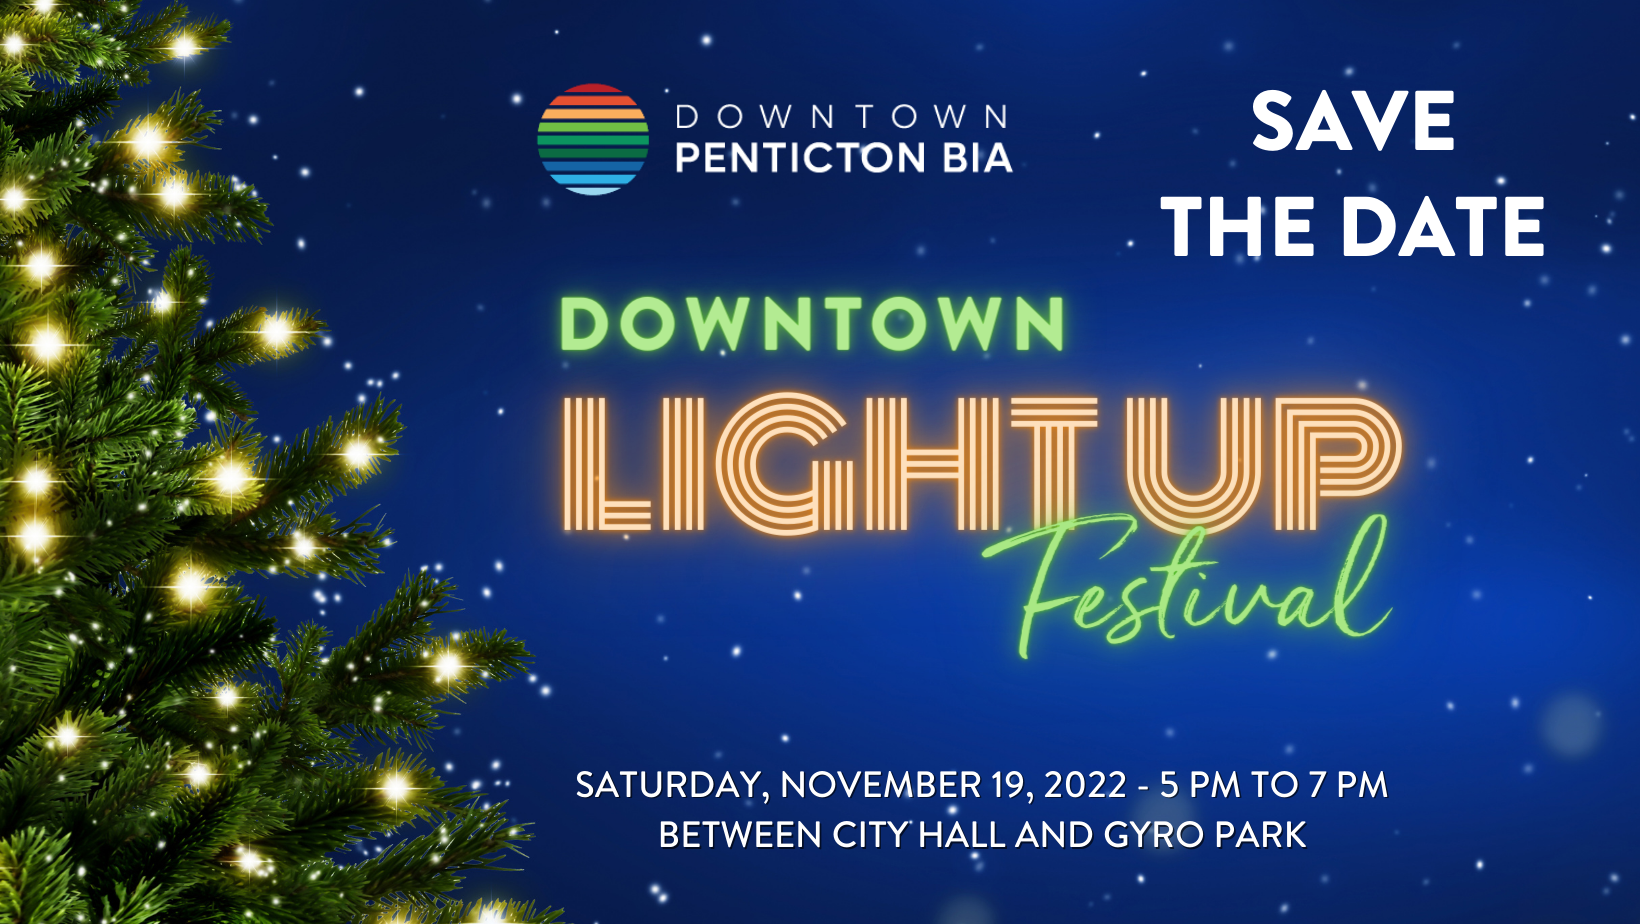 Save the Date for the Downtown Light Up Festival